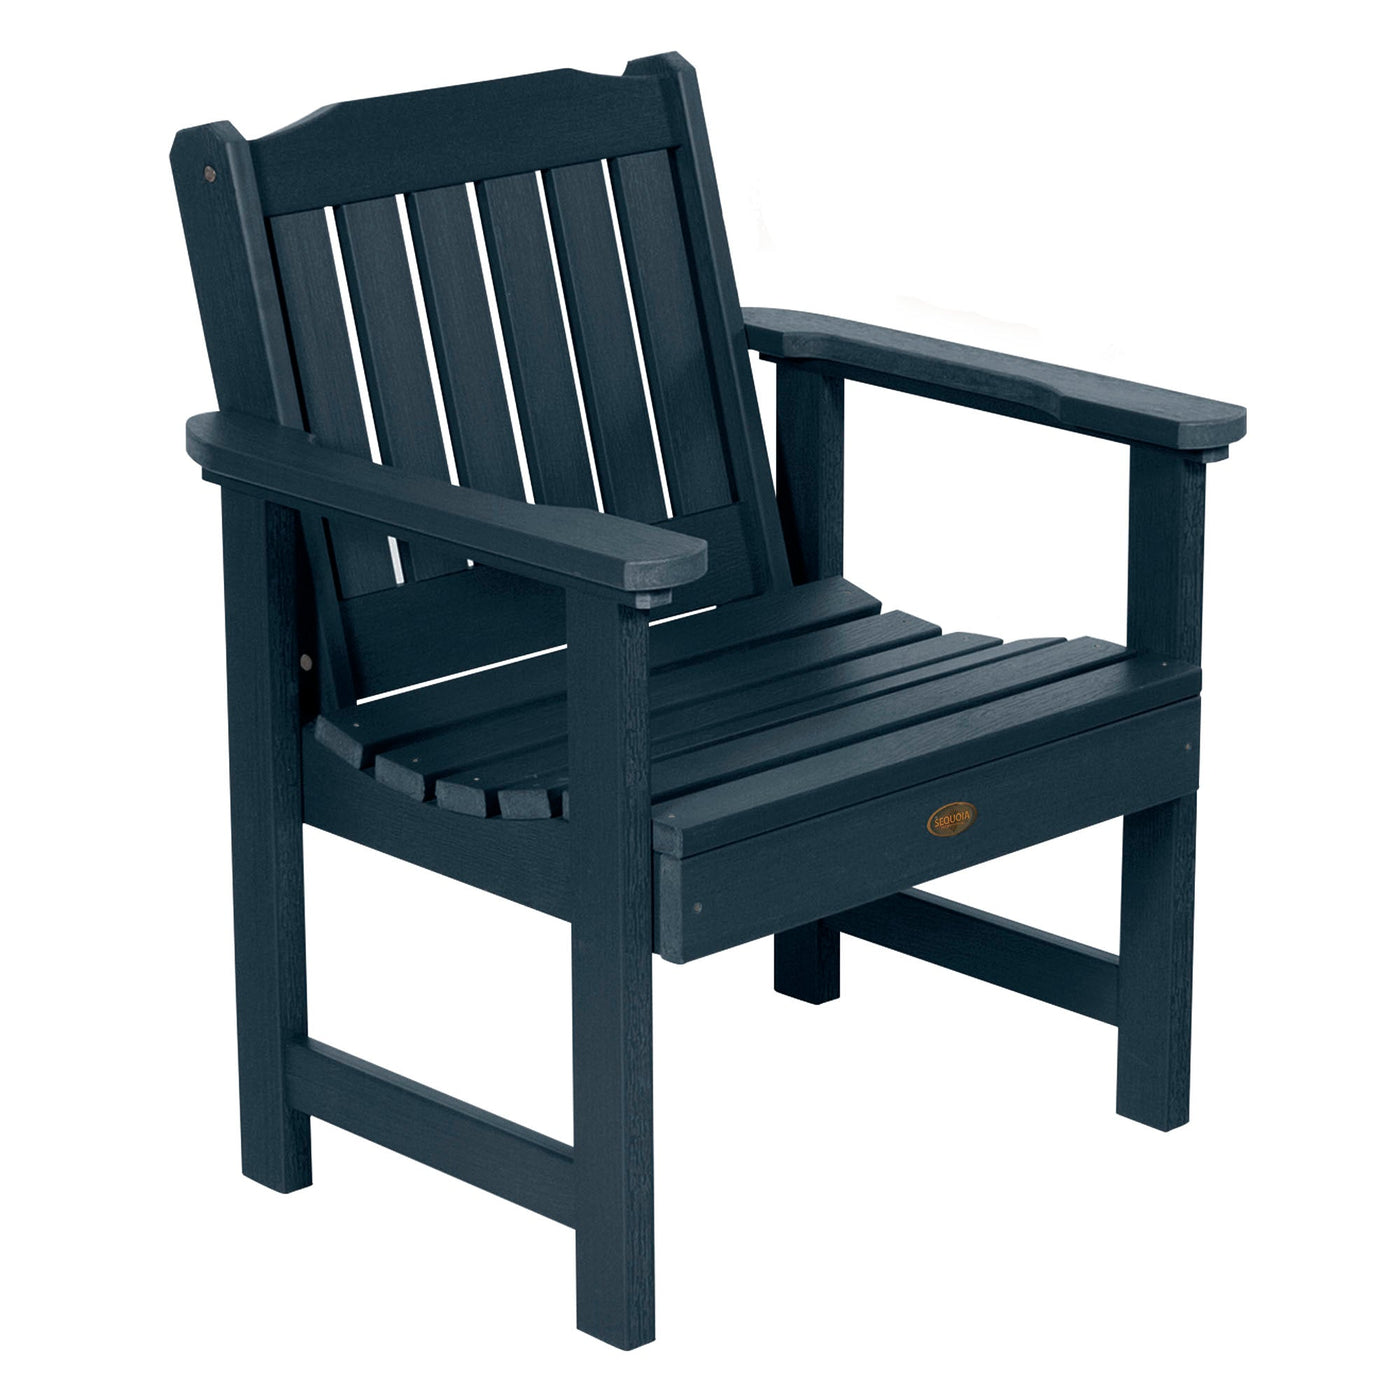 Commercial Grade "Springville" Lounge Chair Sequoia Professional Federal Blue 